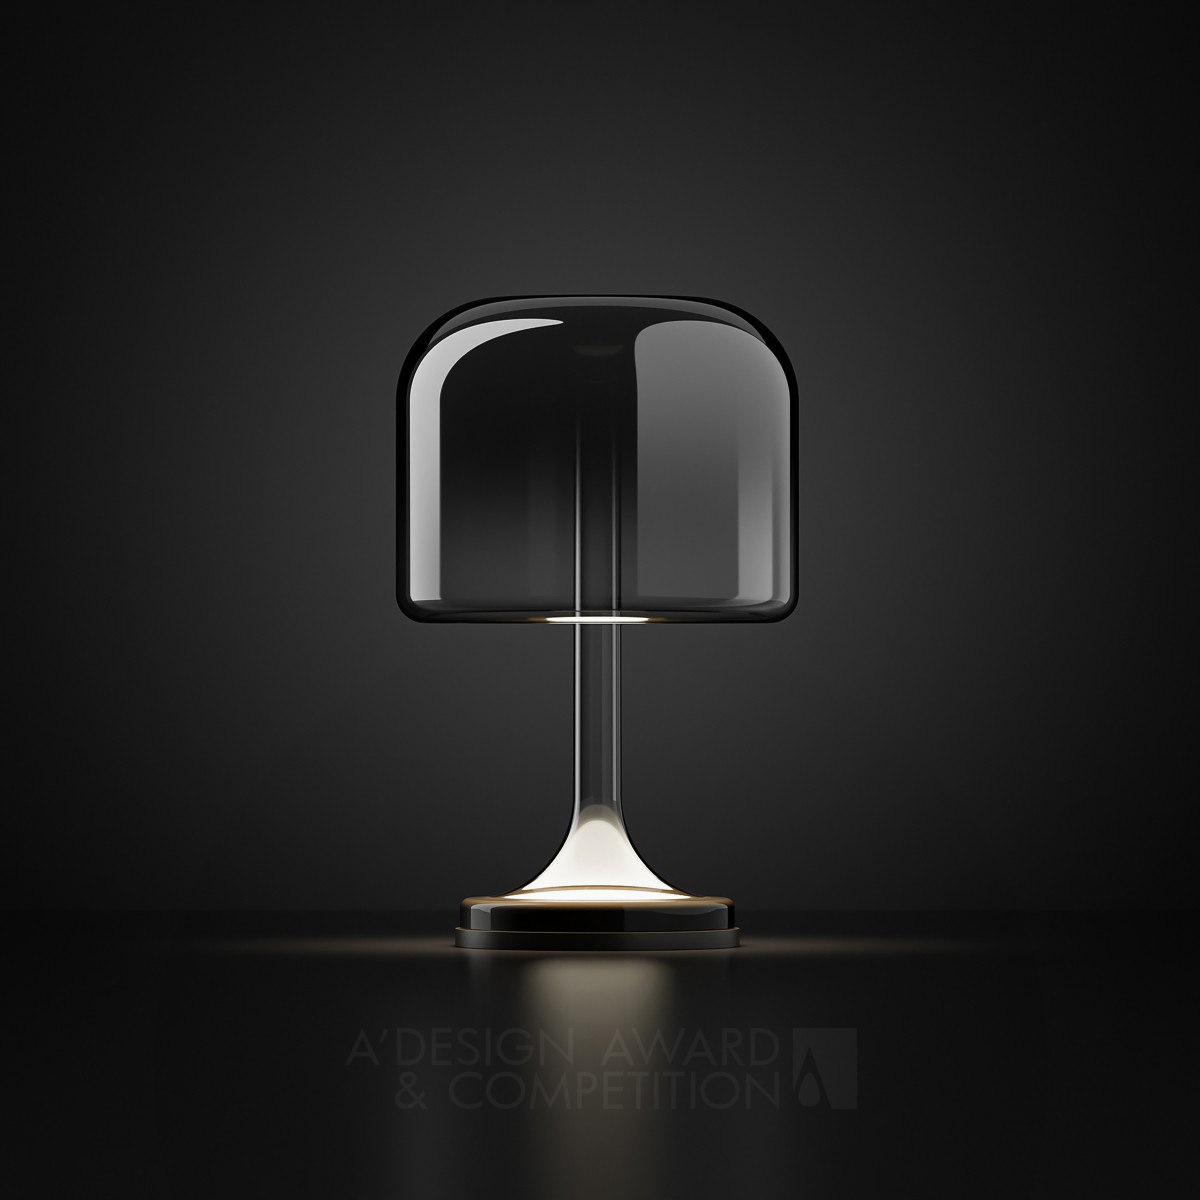 Alexey Danilin wins Platinum at the prestigious A' Lighting Products and Fixtures Design Award with Spirito Table Lamp.